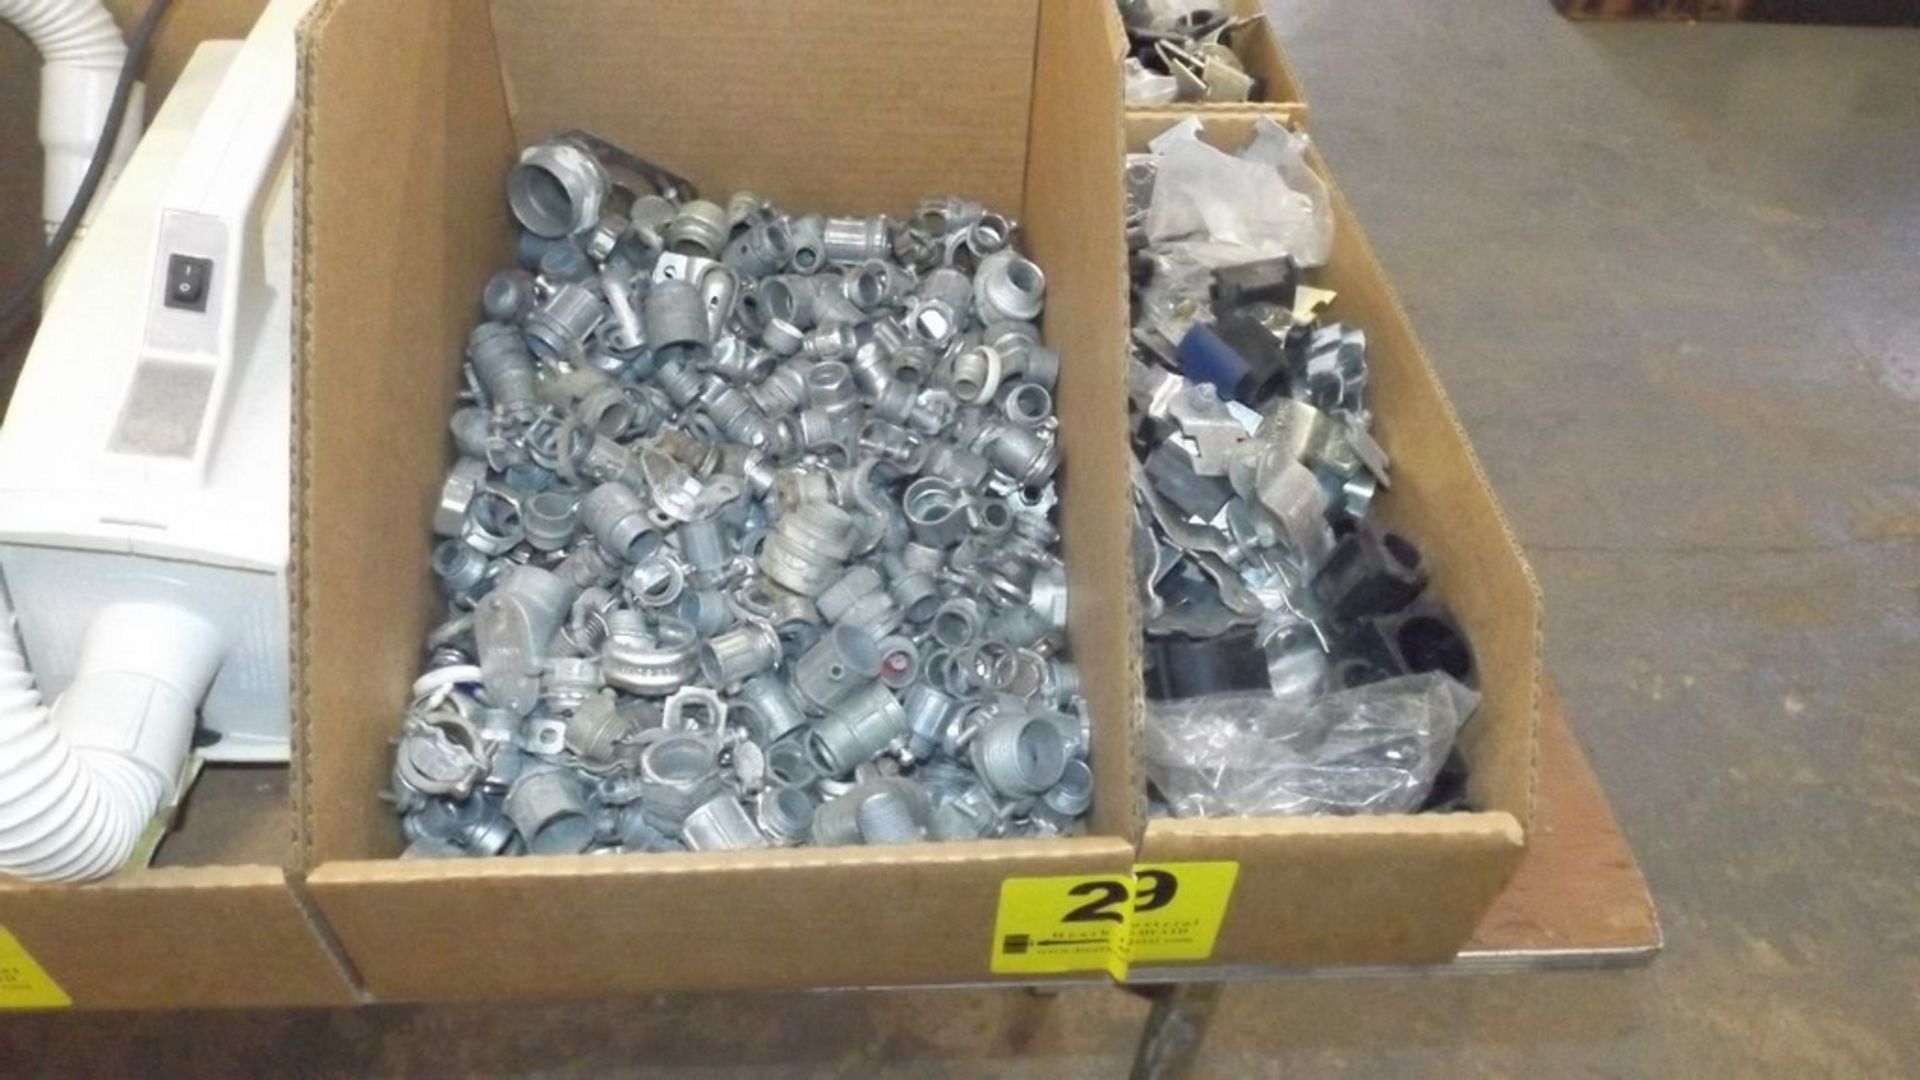 BOXES OF CONDUIT CONNECTORS AND CUSH-A- CLAMPS